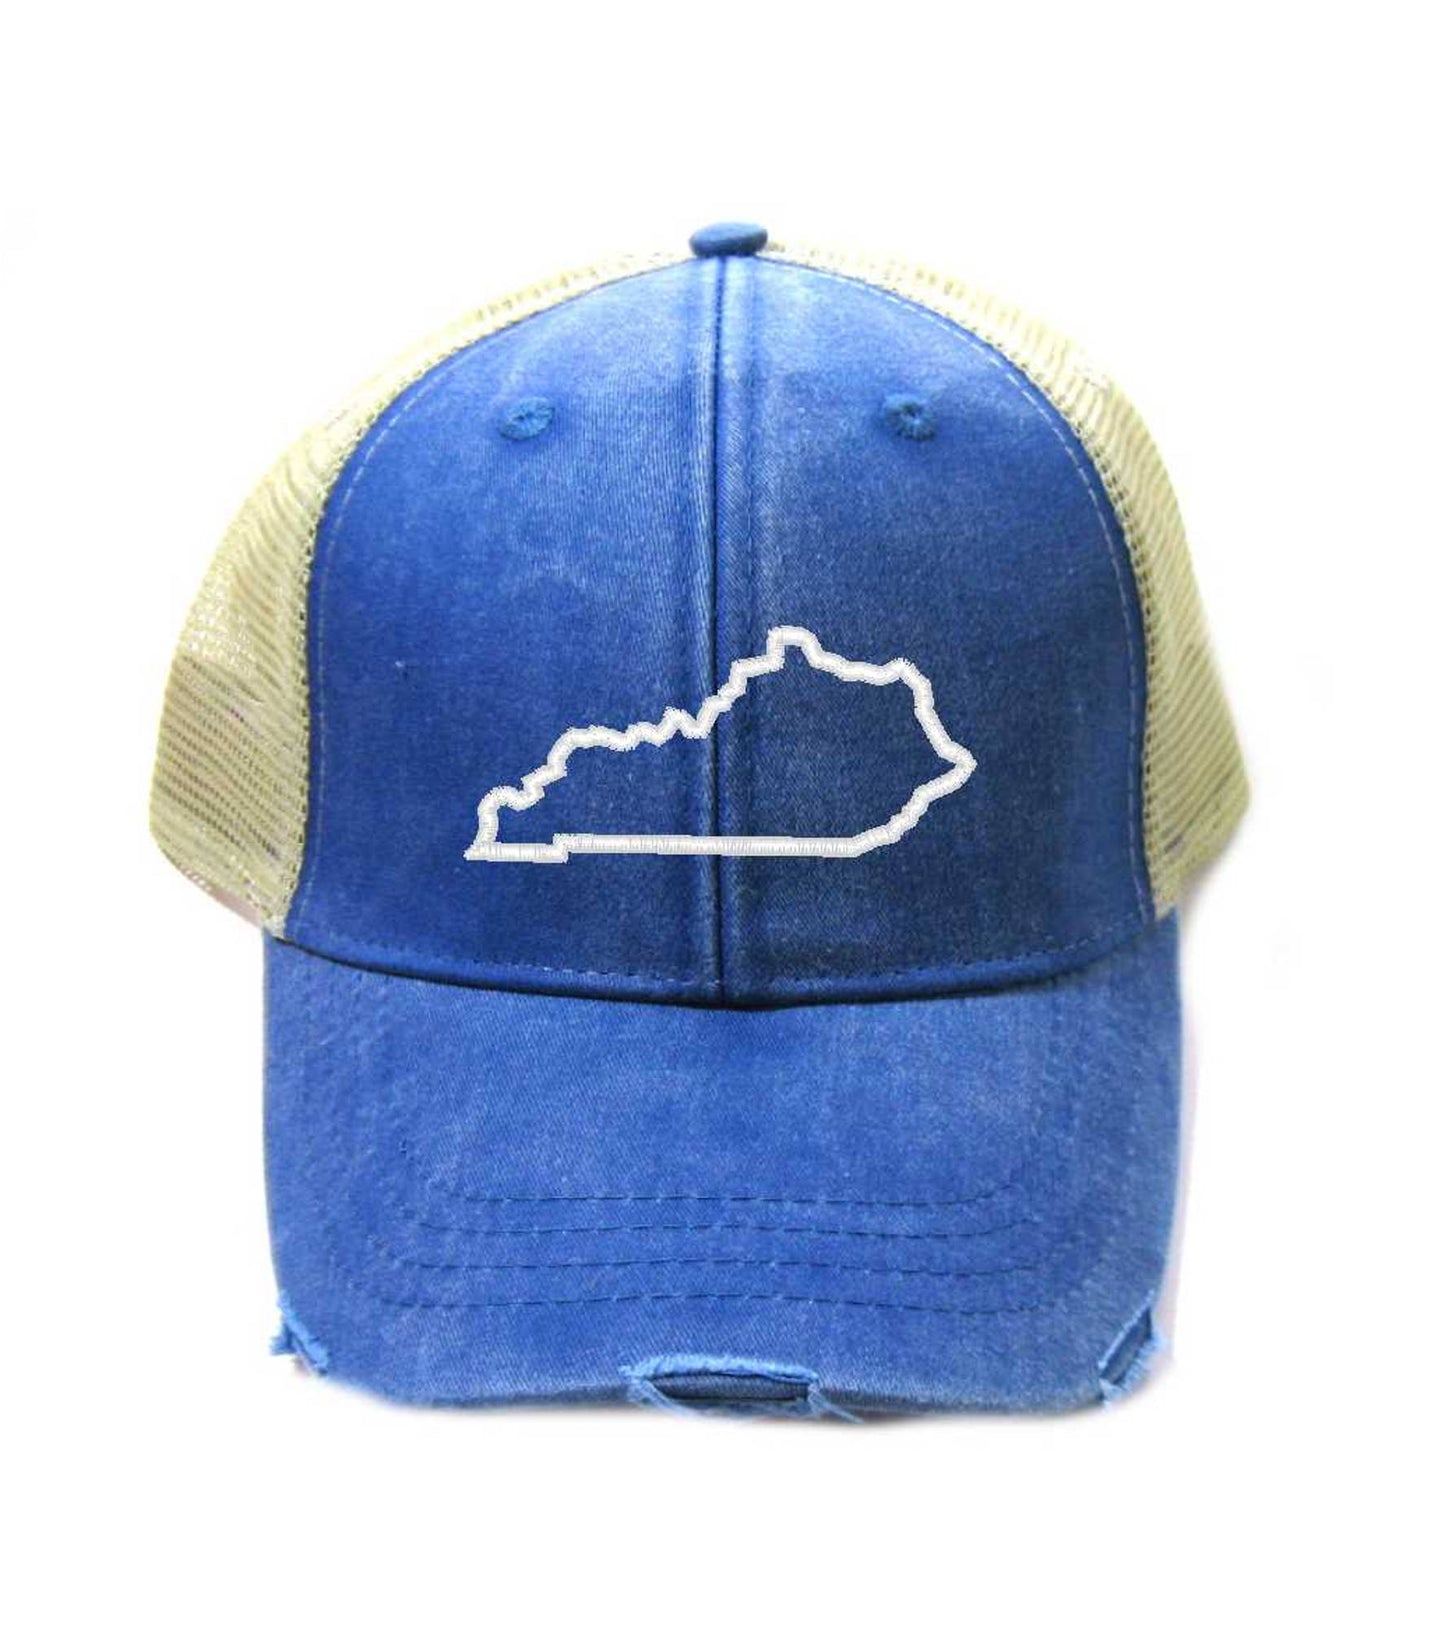 Kentucky Hat - Distressed Snapback Trucker Hat - Kentucky State Outline - Many Colors Available